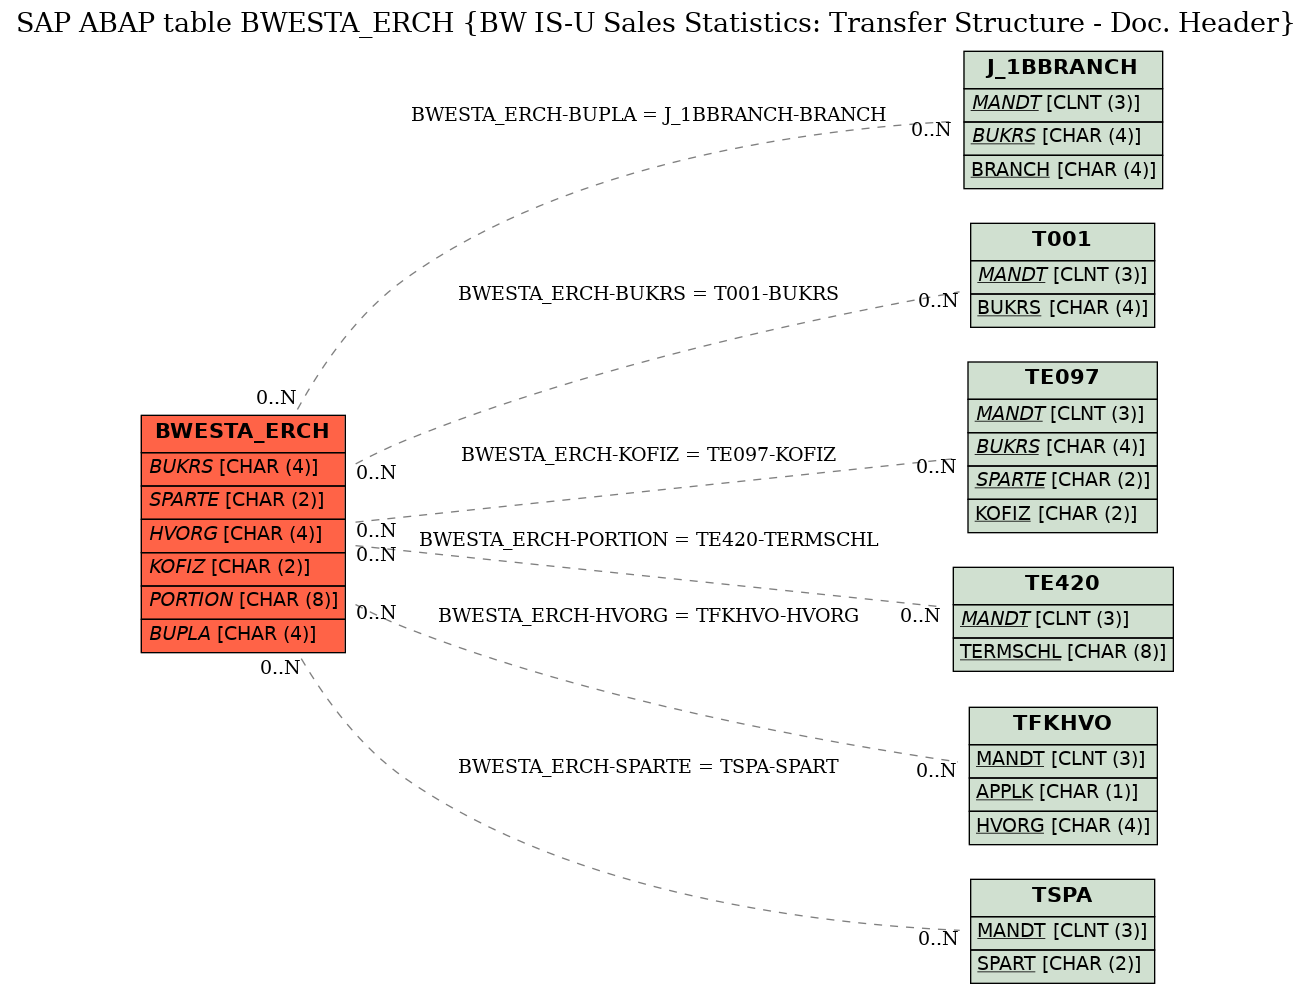 E-R Diagram for table BWESTA_ERCH (BW IS-U Sales Statistics: Transfer Structure - Doc. Header)